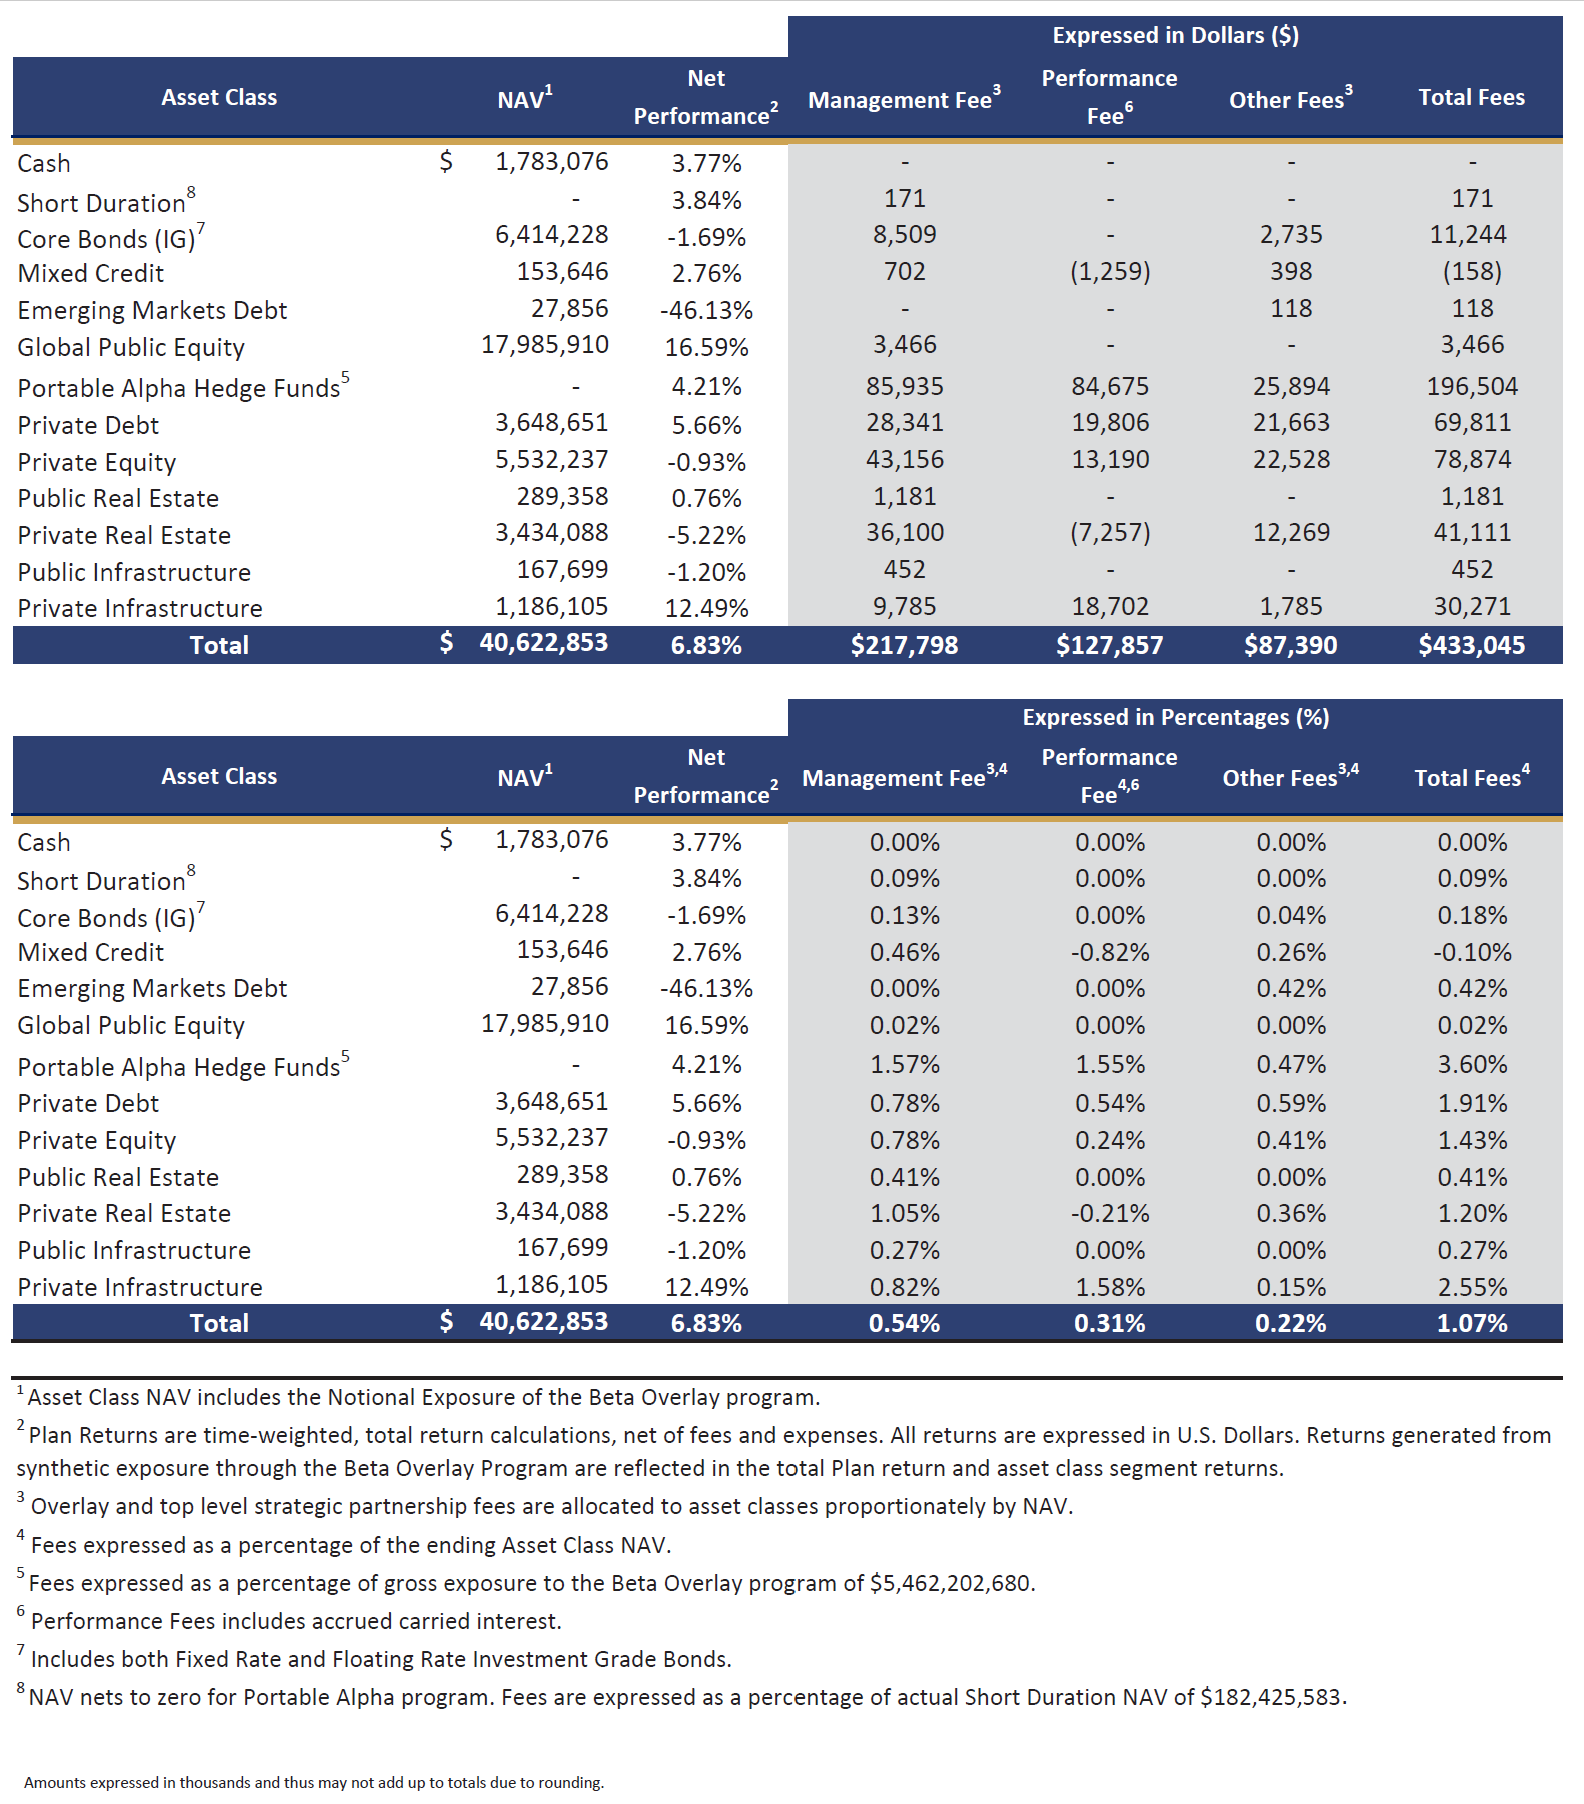 2023 Investment Management Fees and Expenses by Asset Class.